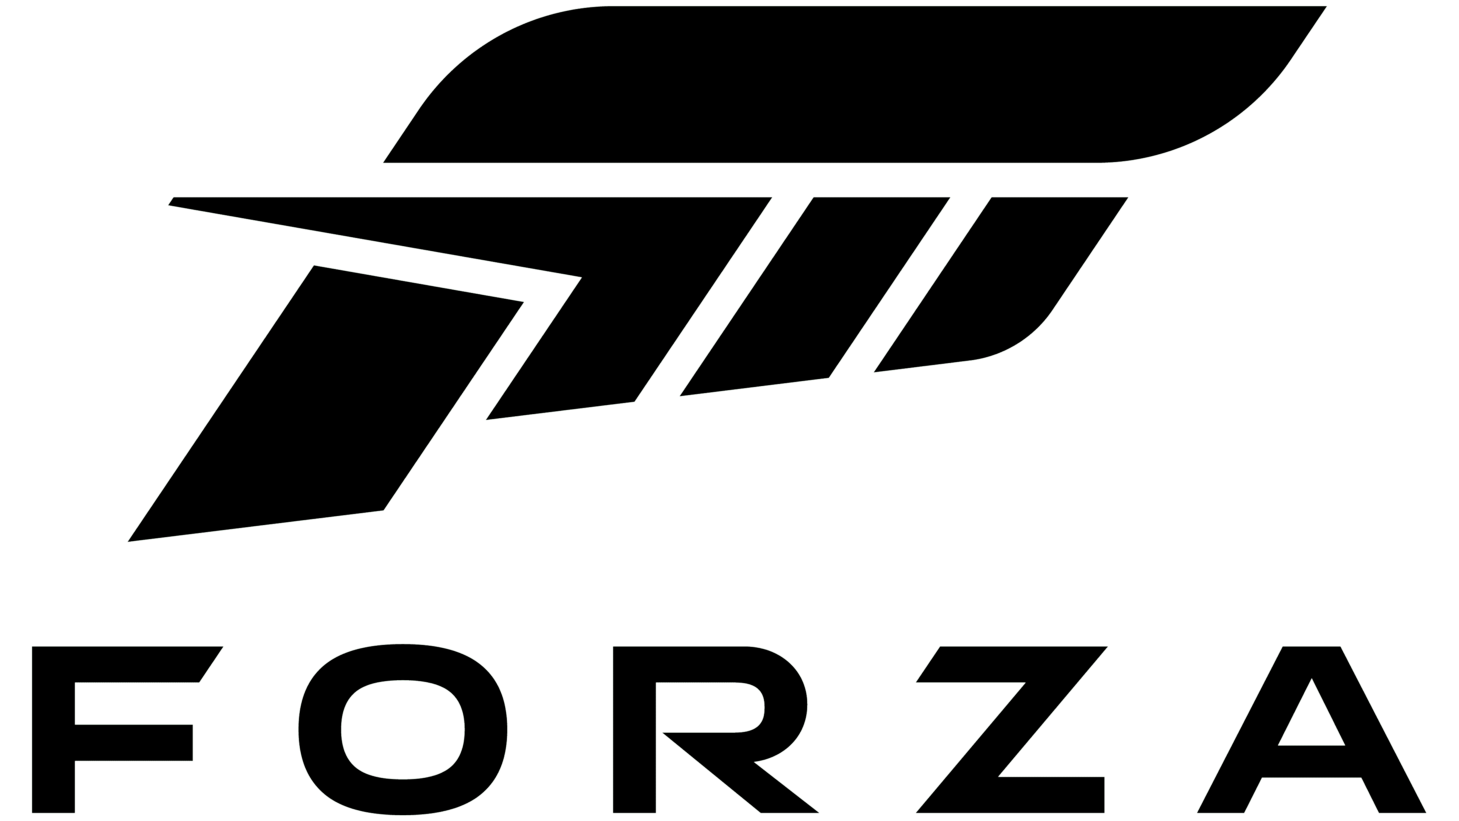 Forza sign